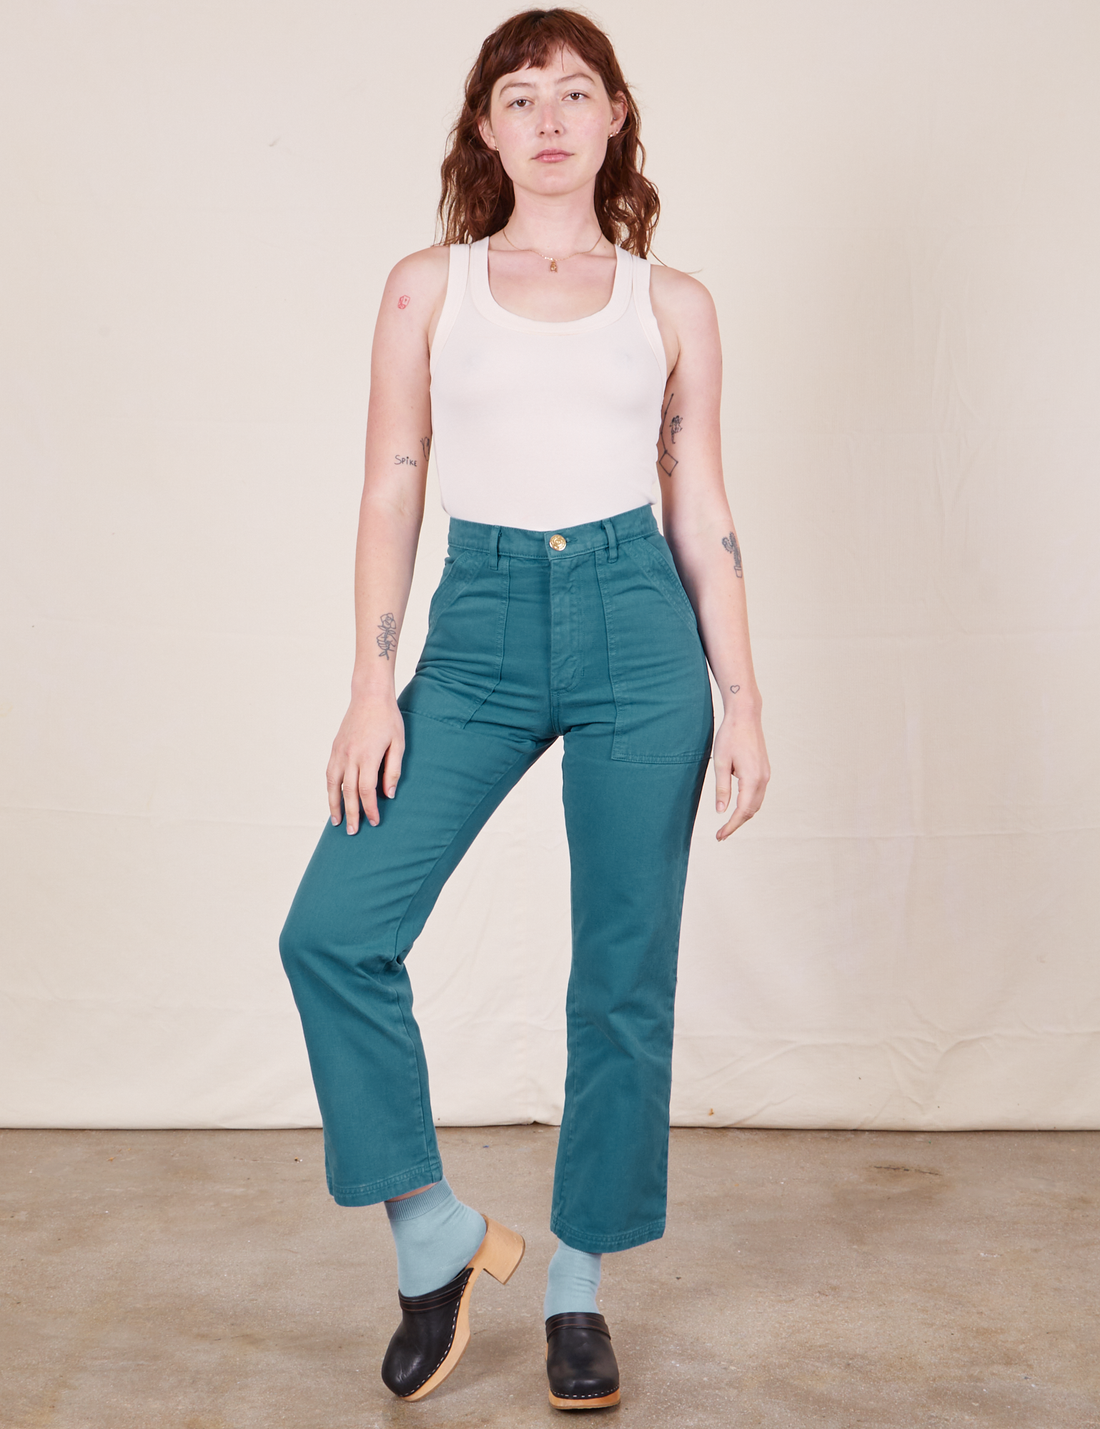 Alex is 5'8" and wearing size XS Work Pants in Marine Blue paired with vintage off-white Tank Top